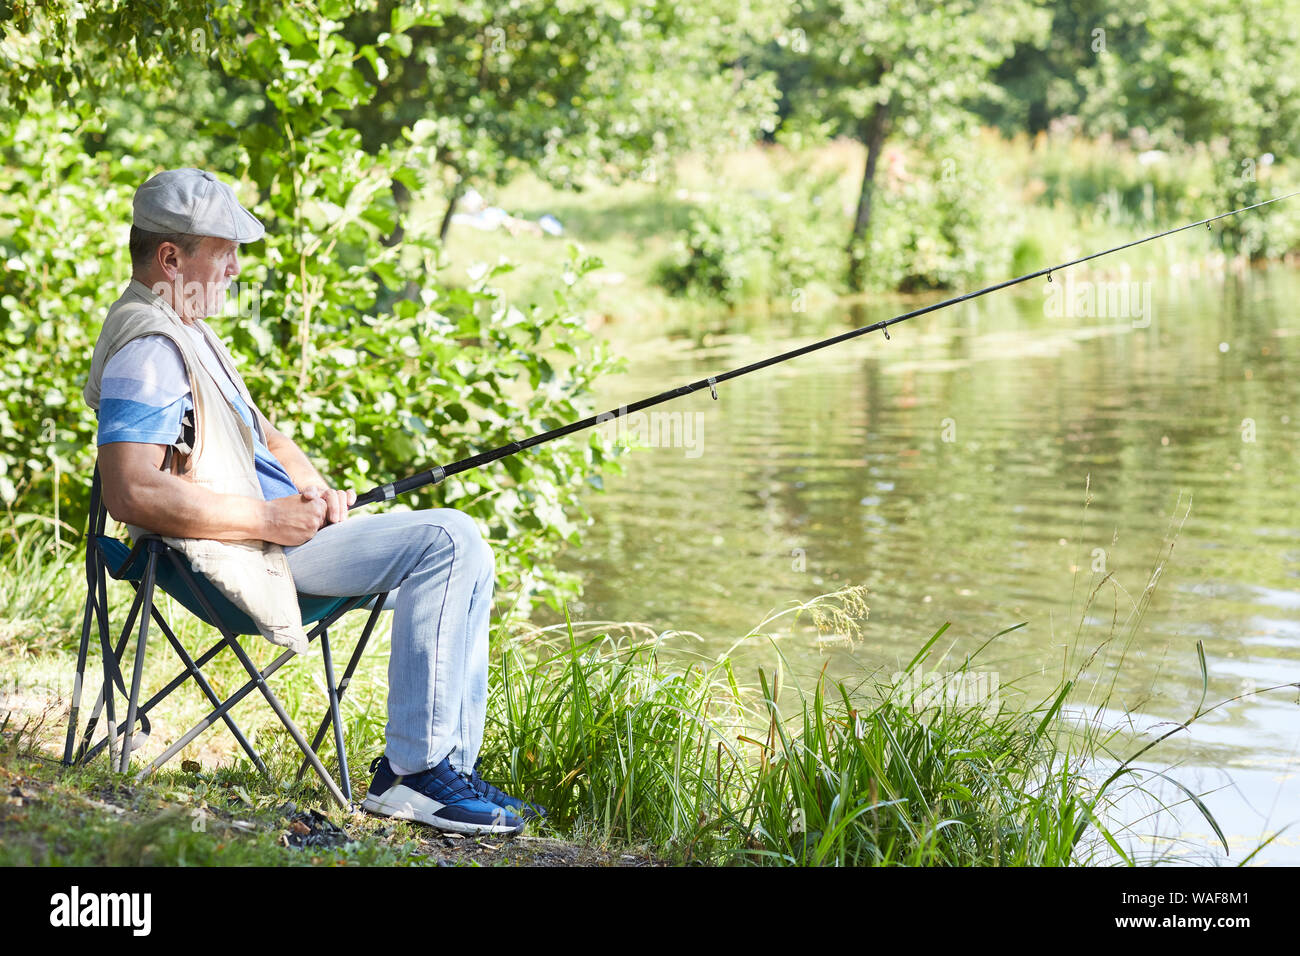 Senior man with fishing rod catching fish while sitting on chair near the  lake outdoors Stock Photo - Alamy